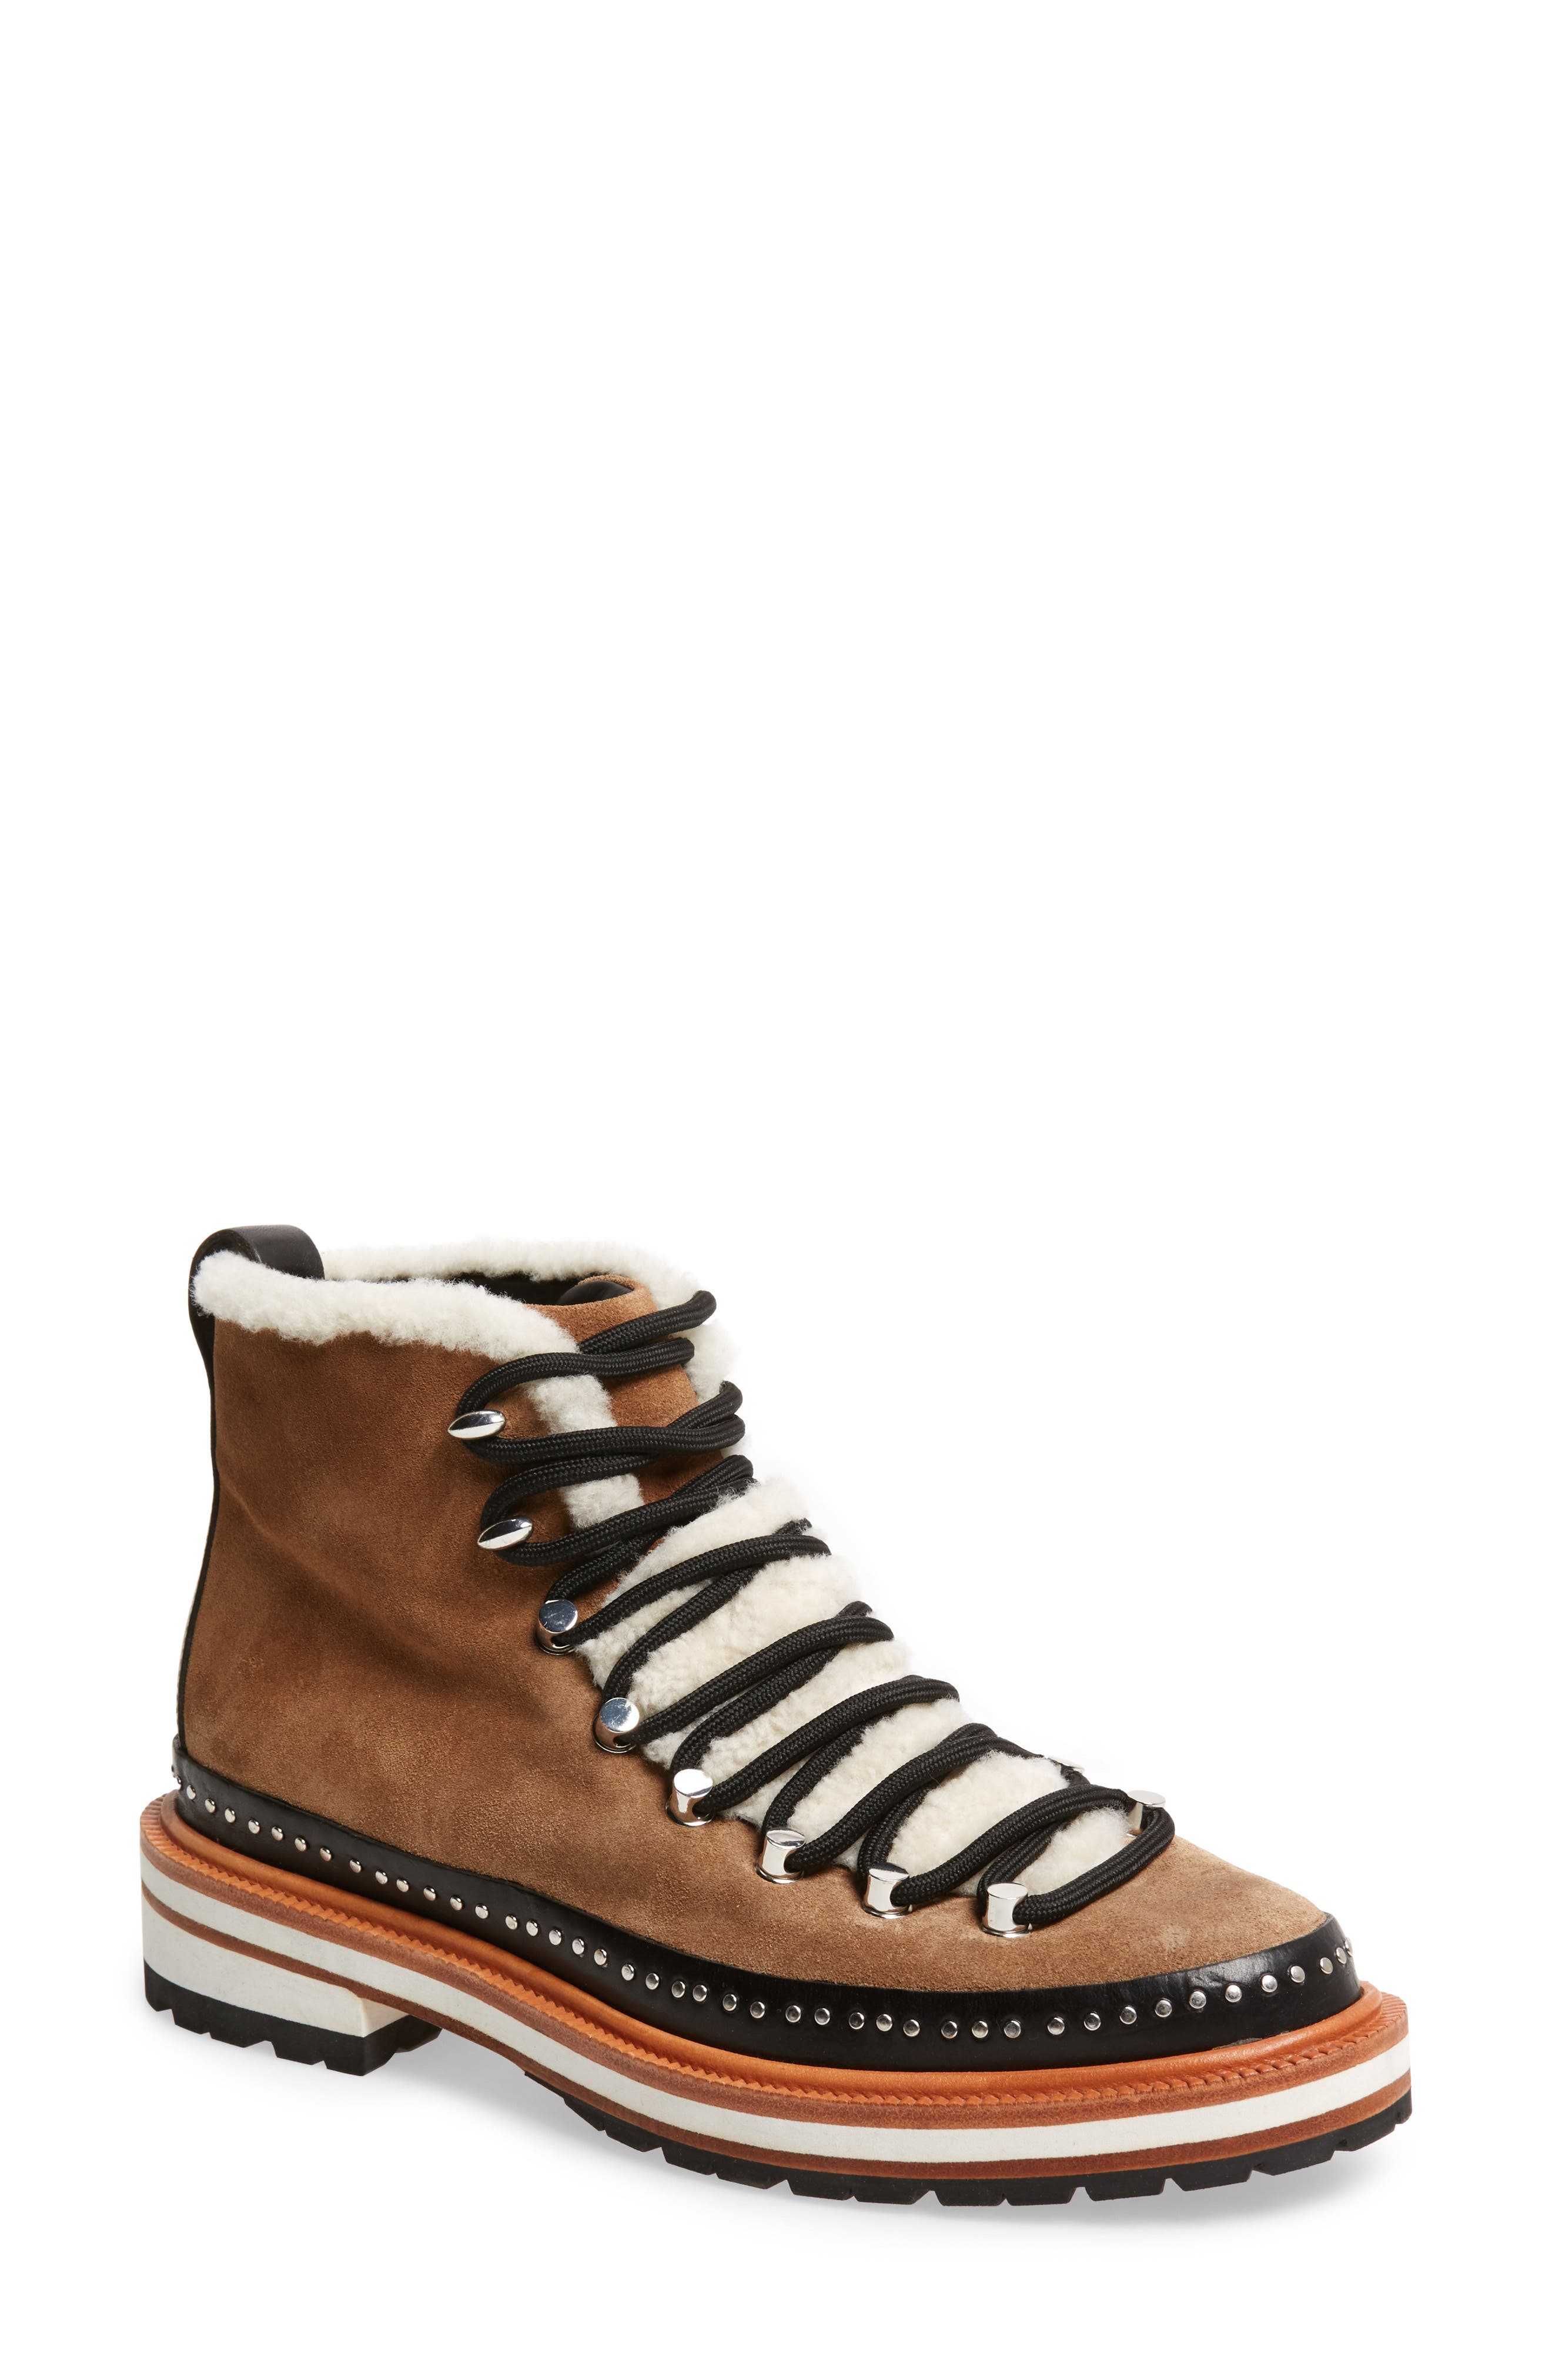 nordstrom rag and bone shoes